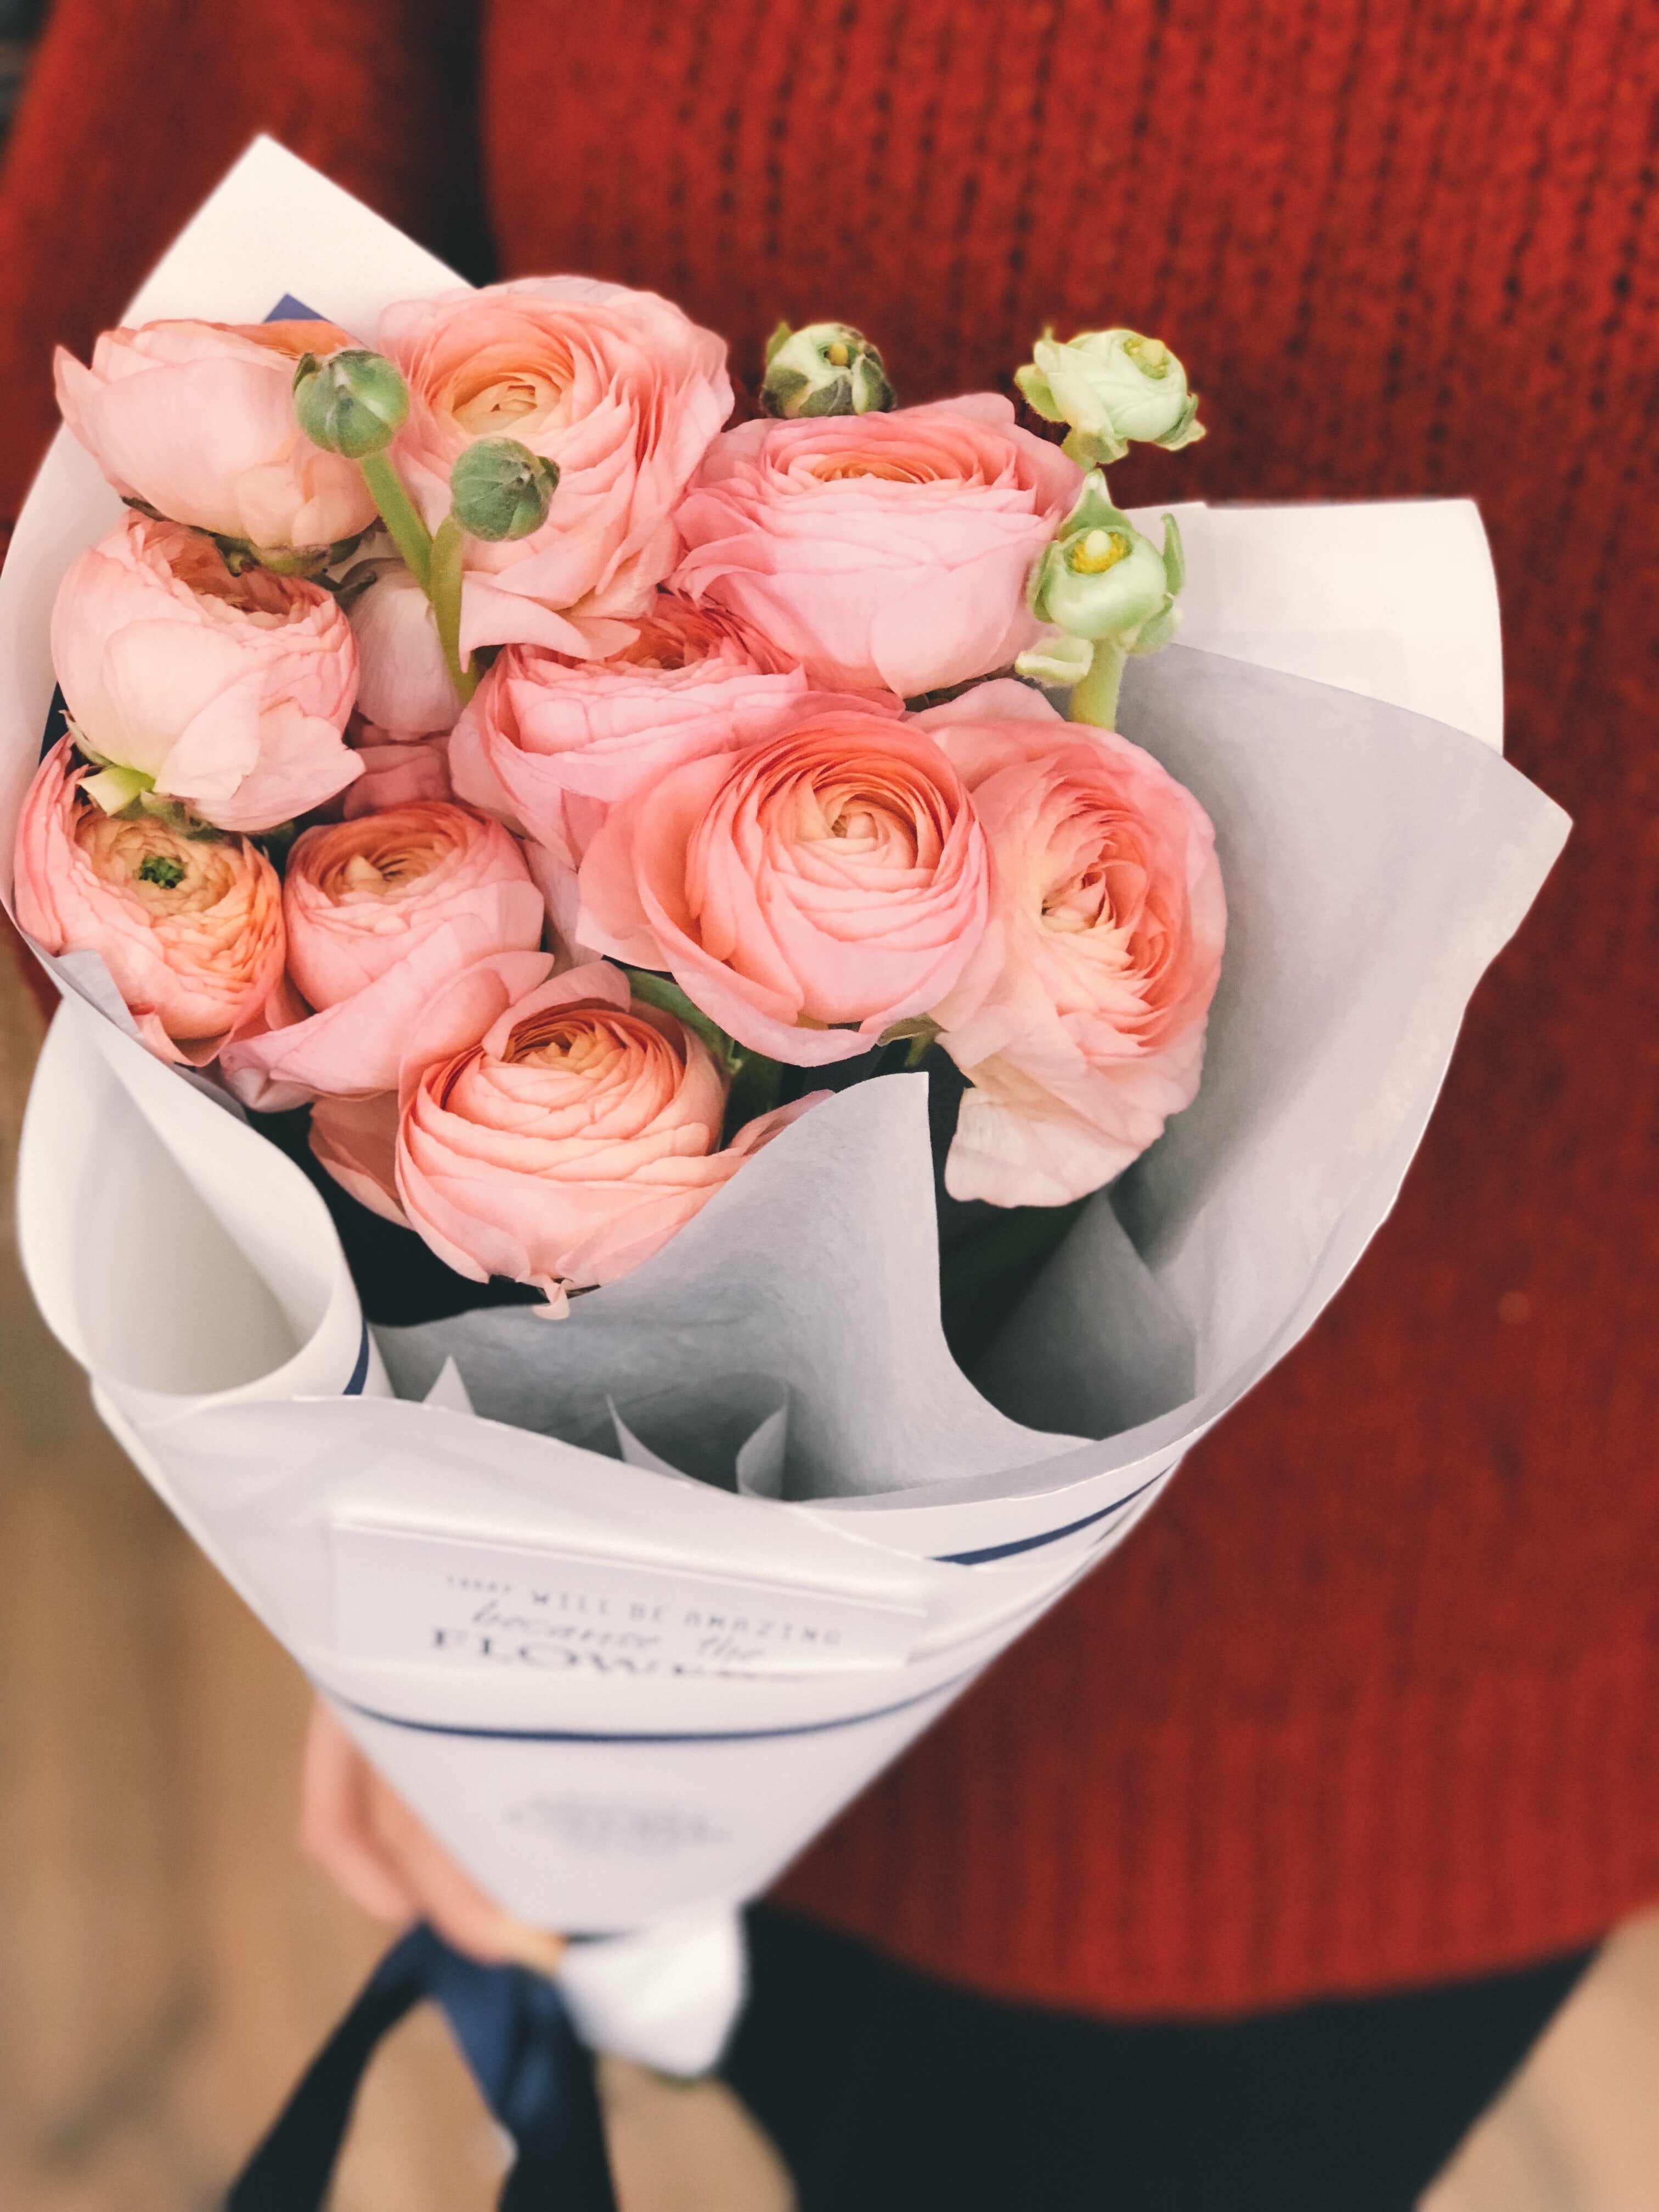 Person wearing red sweater and black pants holding bouquet of pink flowers photo